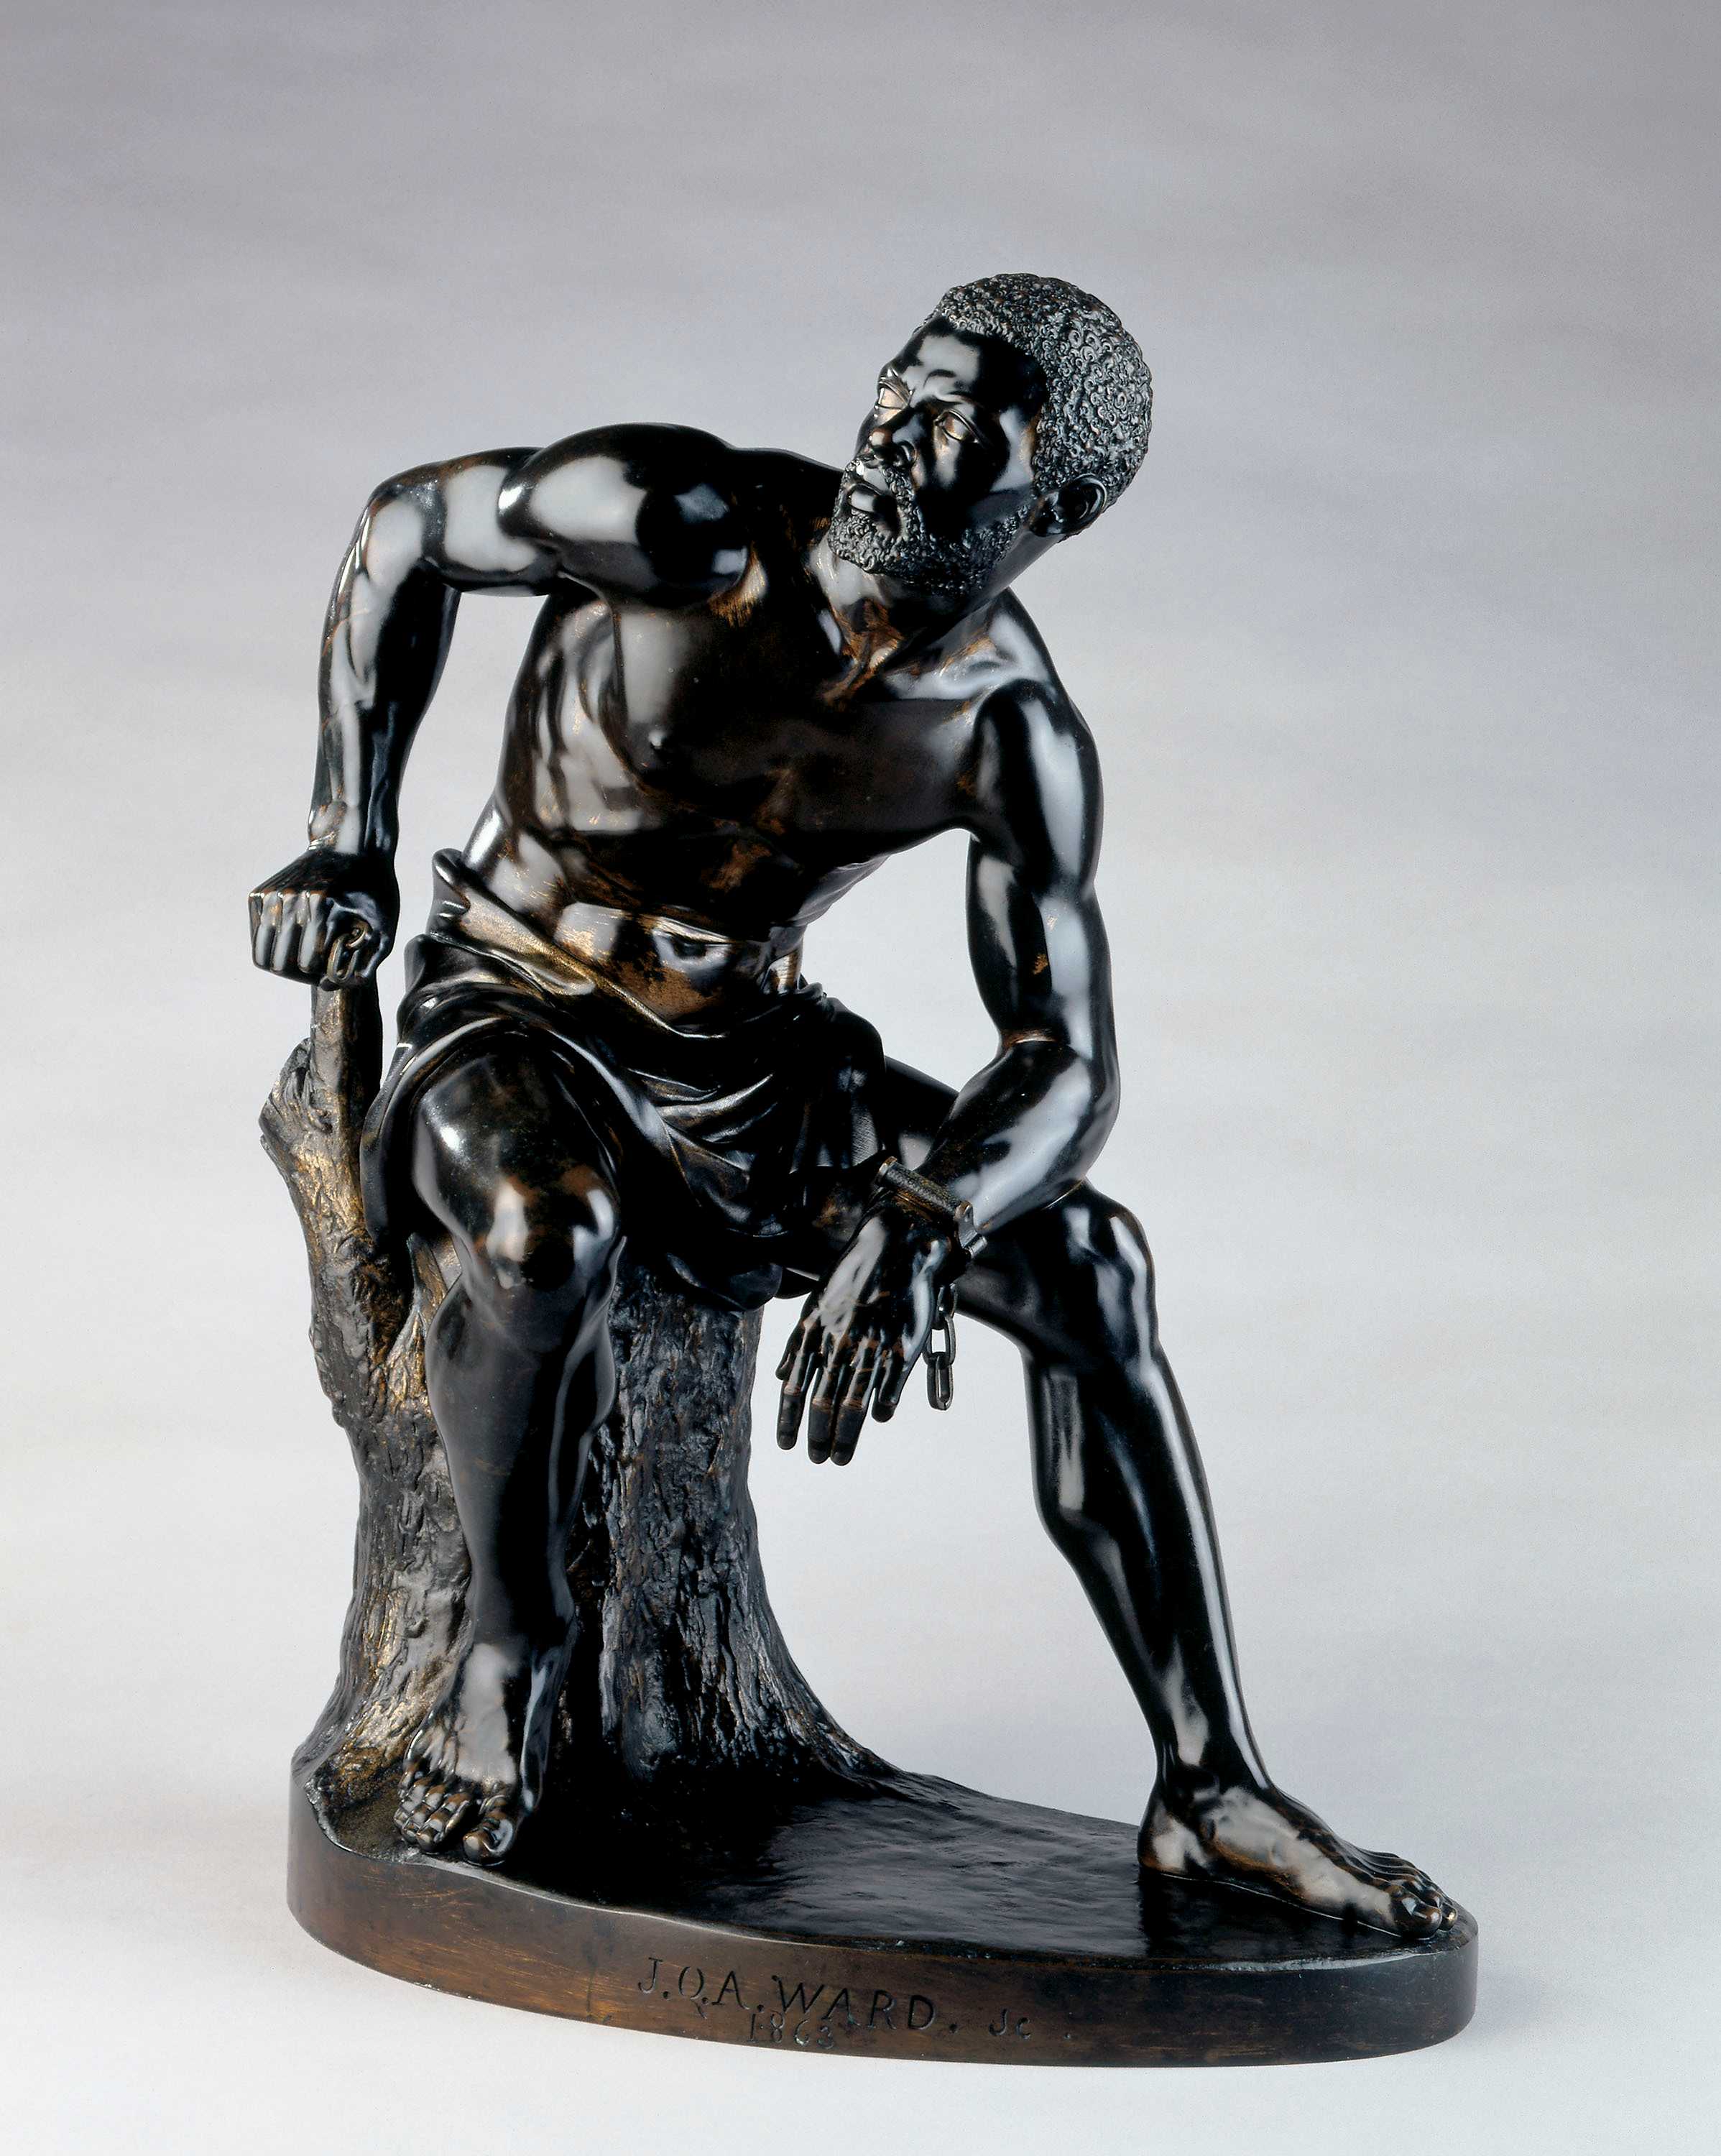 A bronze statue of an shirtless African American man sitting on a stump. On his left wrist is a single handcuff, the chain dangling down.